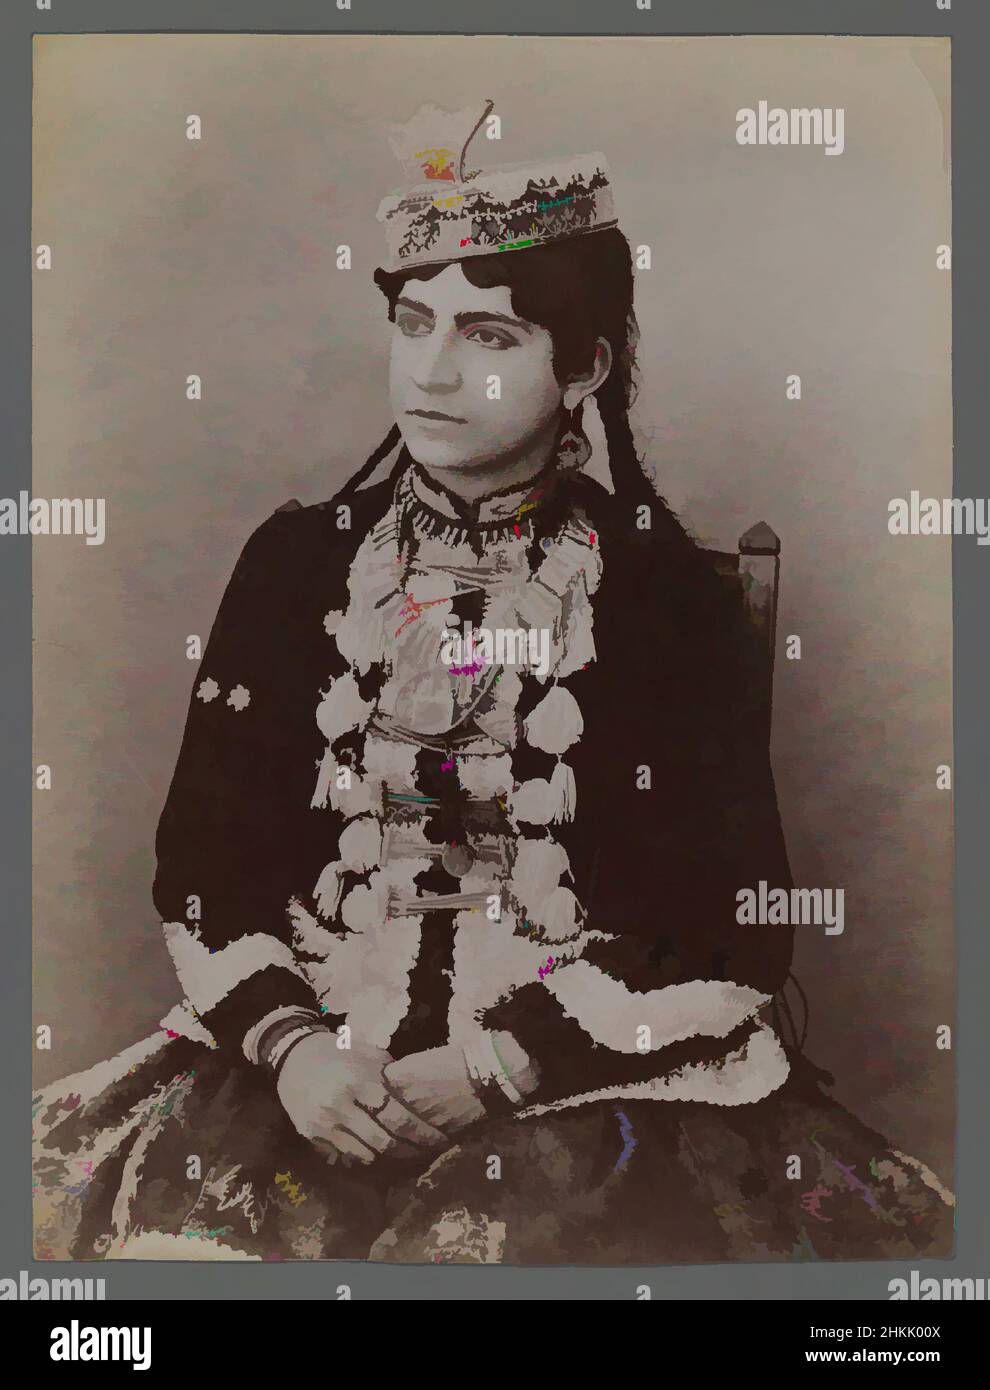 Art inspired by Young Girl in Urban Dress, featuring Hat with Crown Ornament, One of 274 Vintage Photographs, Albumen silver photograph, late 19th-early 20th century, Qajar, Qajar Period, 8 3/16 x 6 1/8 in., 20.8 x 15.6 cm, Classic works modernized by Artotop with a splash of modernity. Shapes, color and value, eye-catching visual impact on art. Emotions through freedom of artworks in a contemporary way. A timeless message pursuing a wildly creative new direction. Artists turning to the digital medium and creating the Artotop NFT Stock Photo